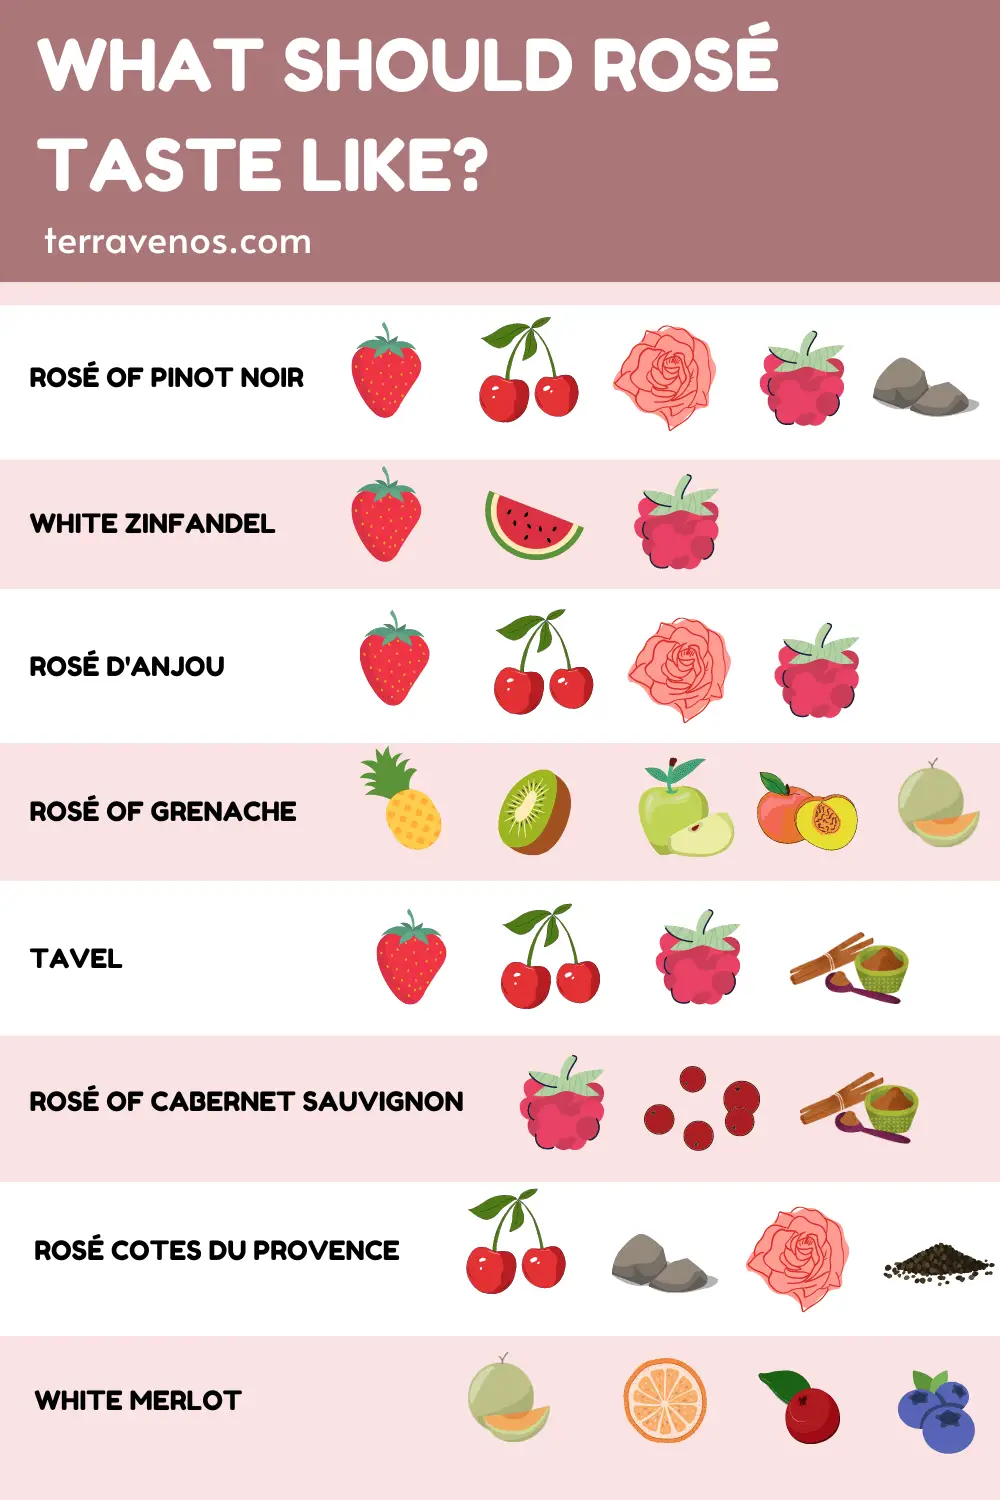 what should rose taste like chart infographic - what is rose